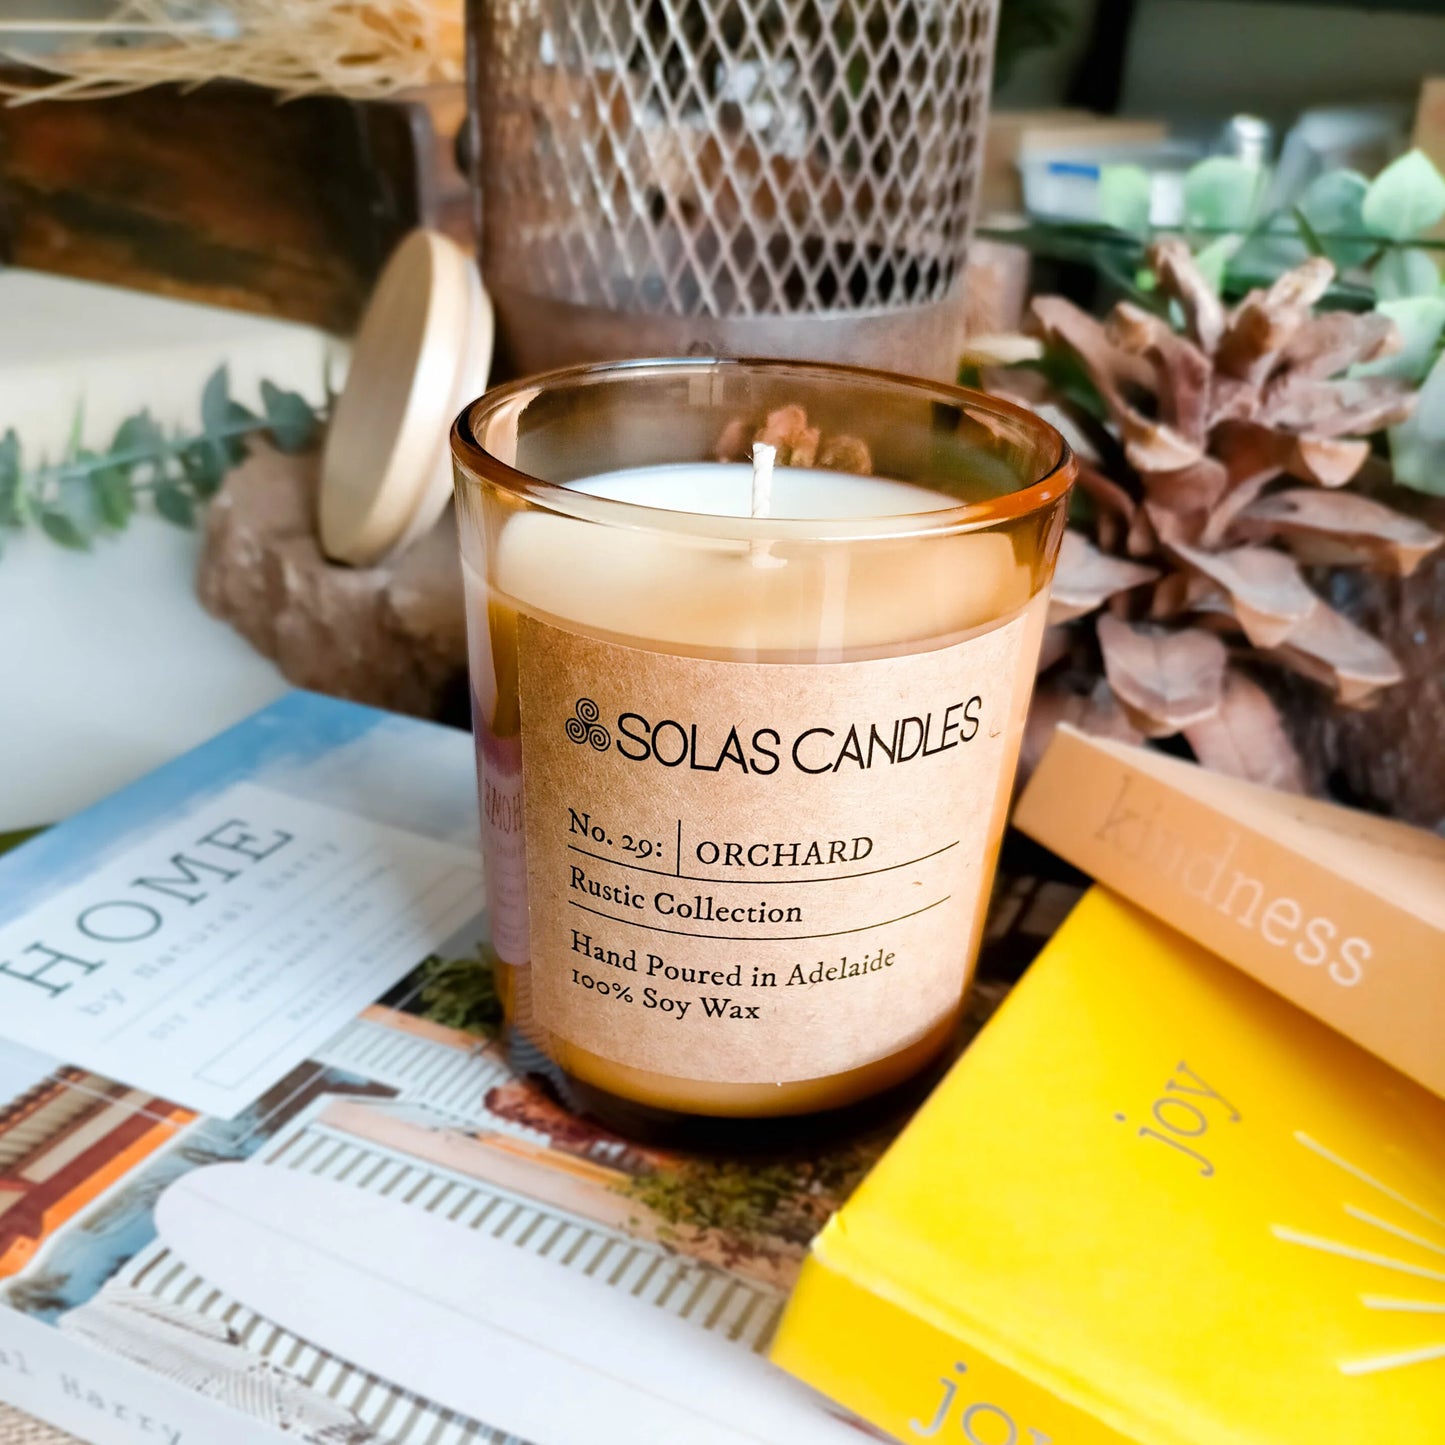 Solas Candles - Rustic Collection, No.29 Orchard